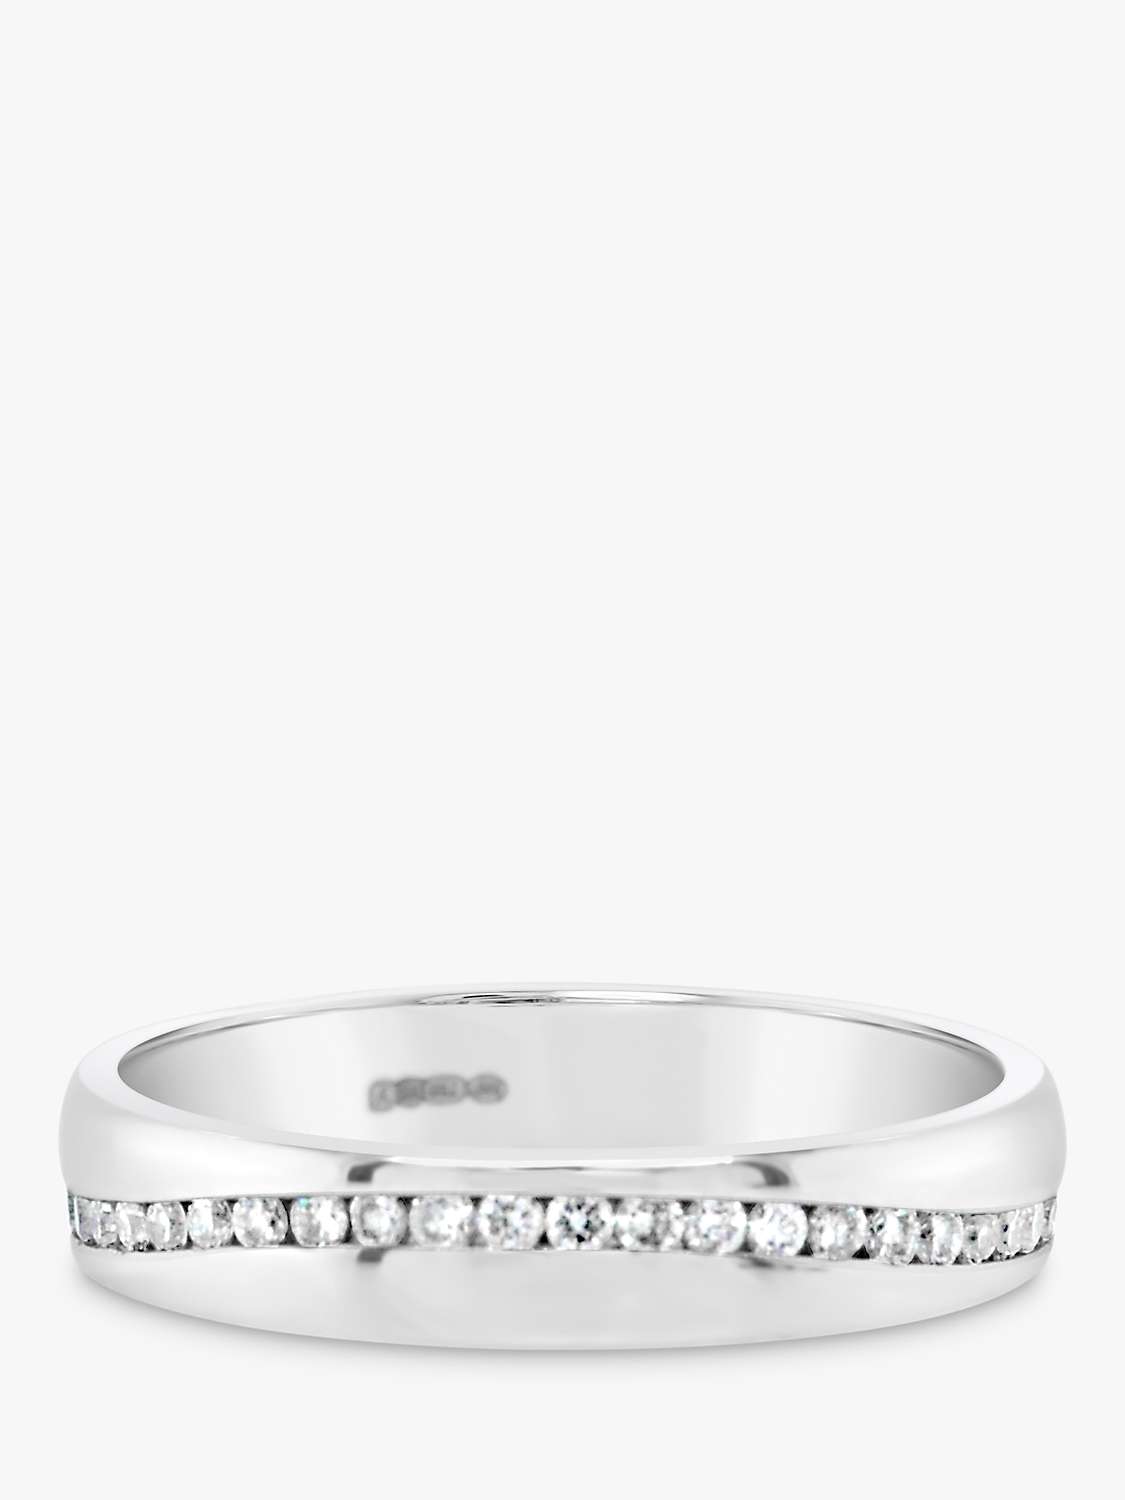 Buy Milton & Humble Jewellery Second Hand 18ct White Gold Diamond Wave Band Ring Online at johnlewis.com